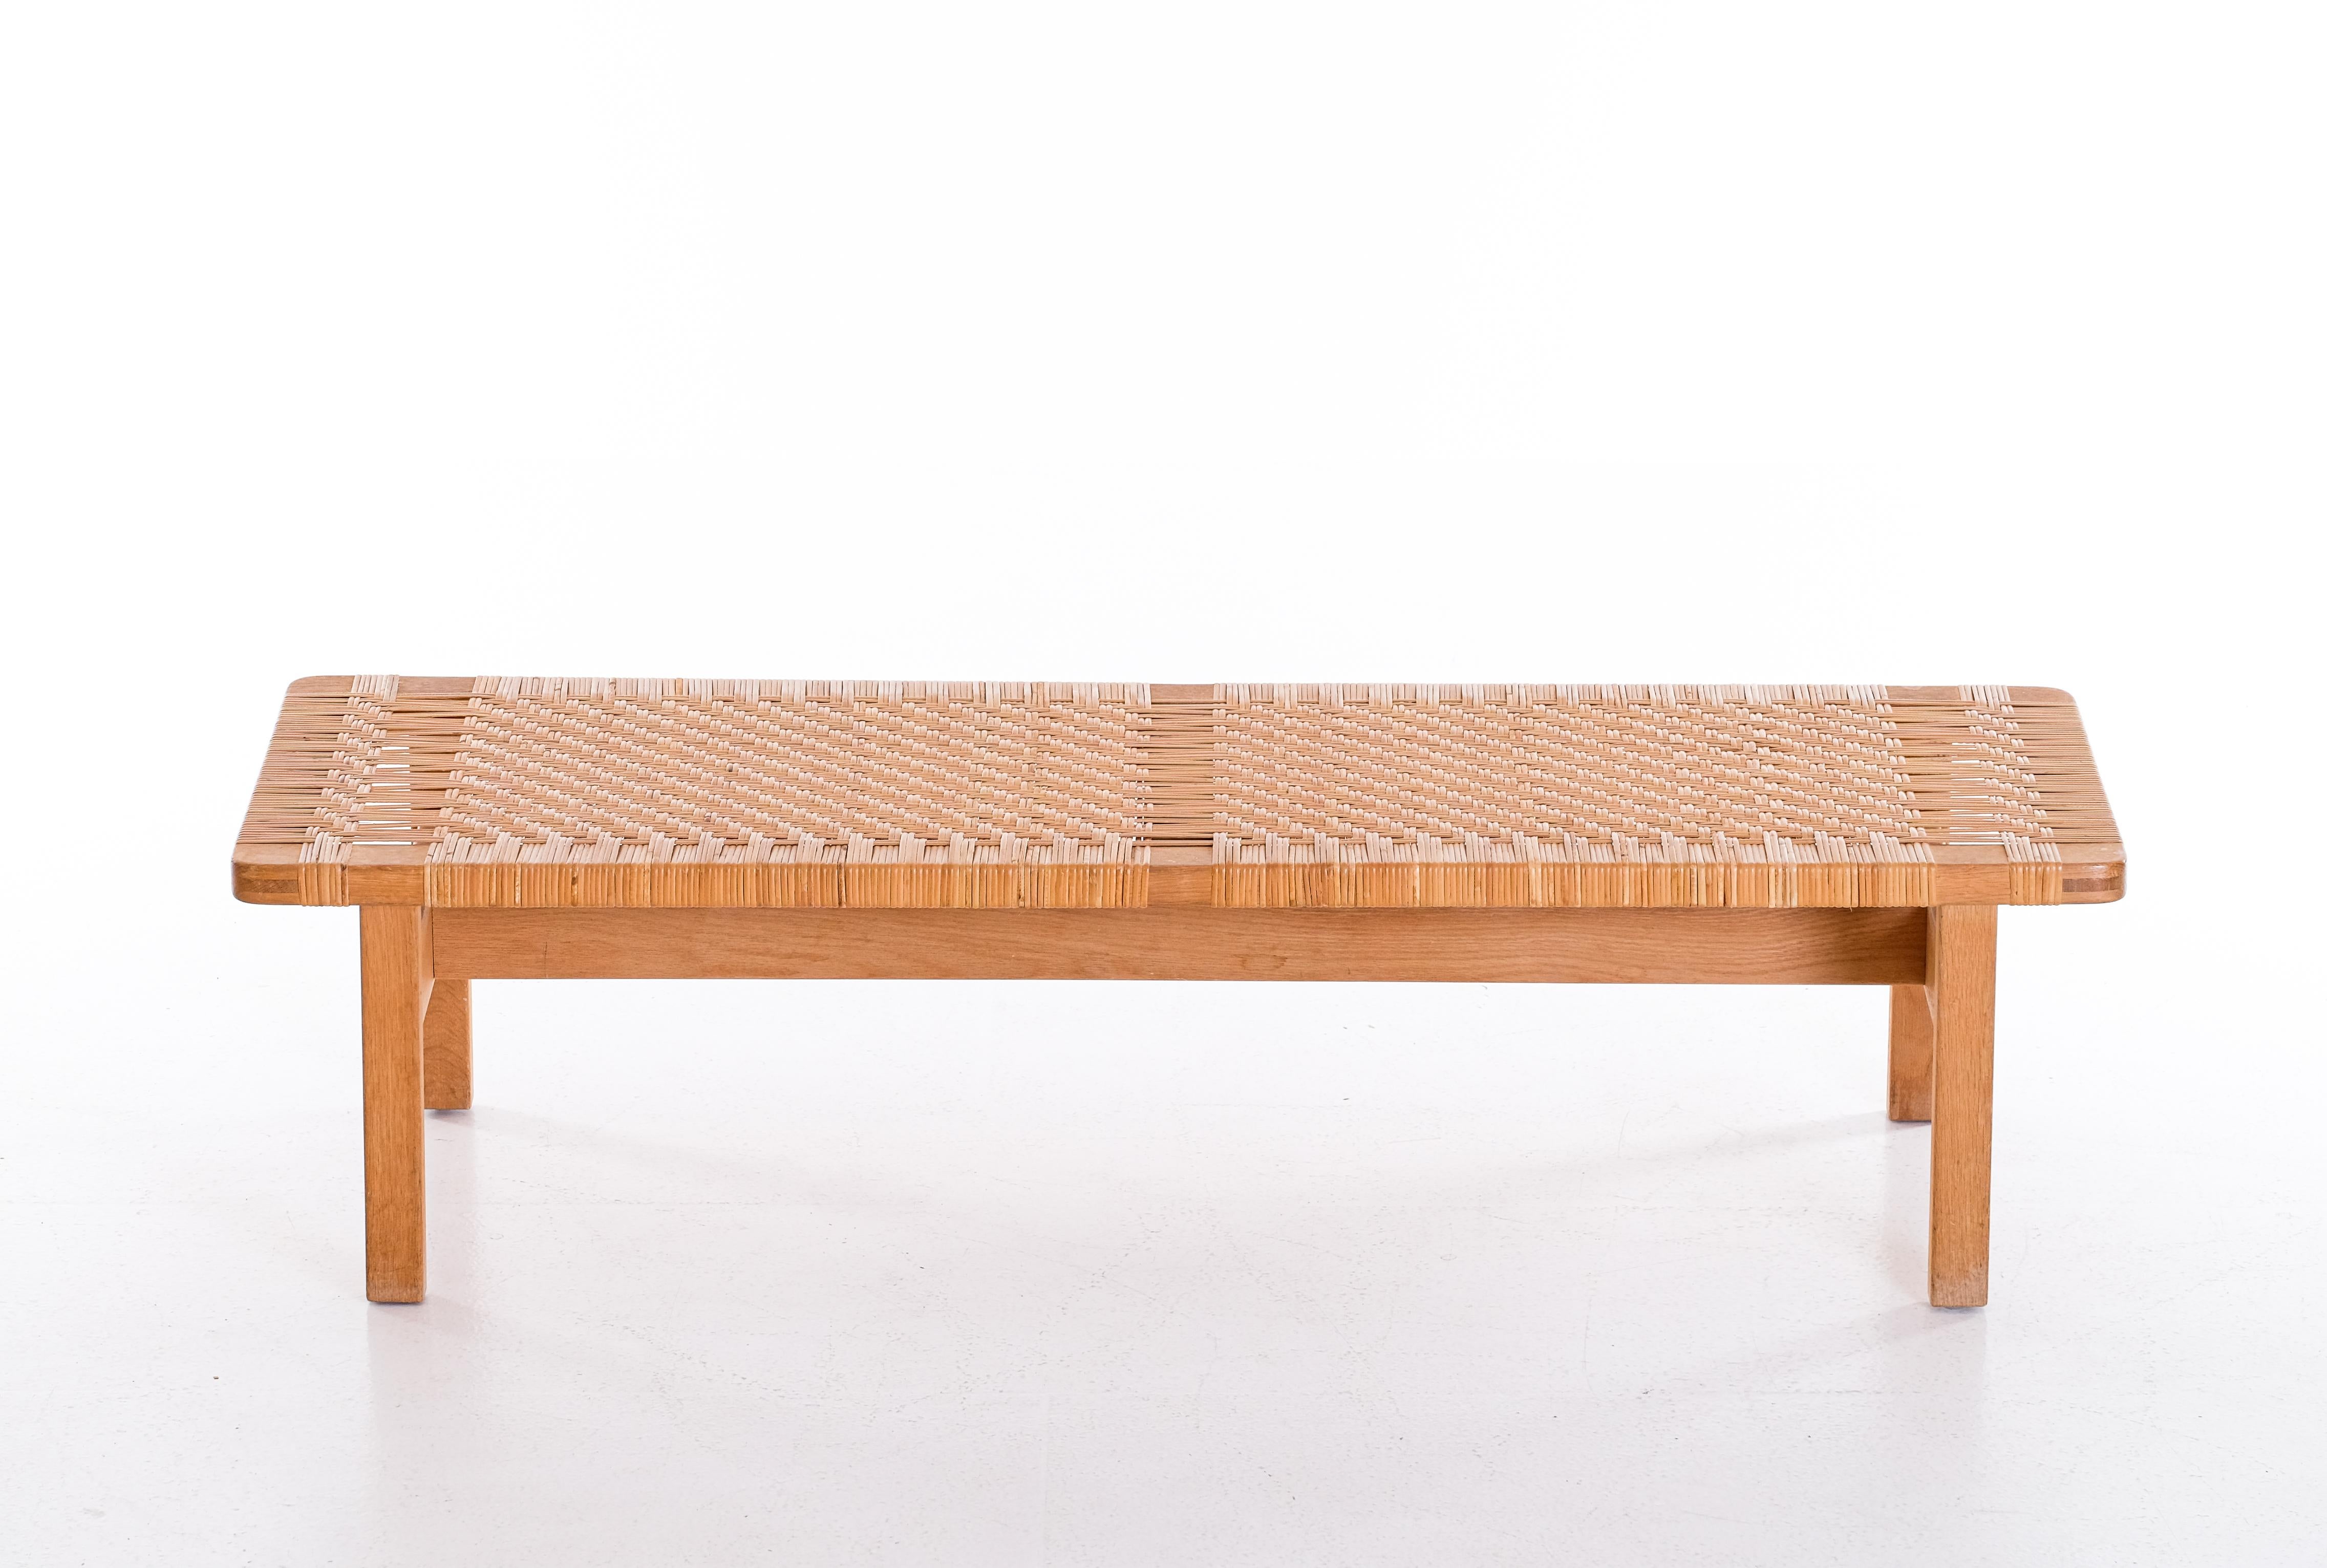 Large bench / coffee table model 272 designed by Børge Mogensen for Fredericia Stølefabrik, Denmark, 1960s. Solid oak frame with hand-woven cane all in very good original condition.